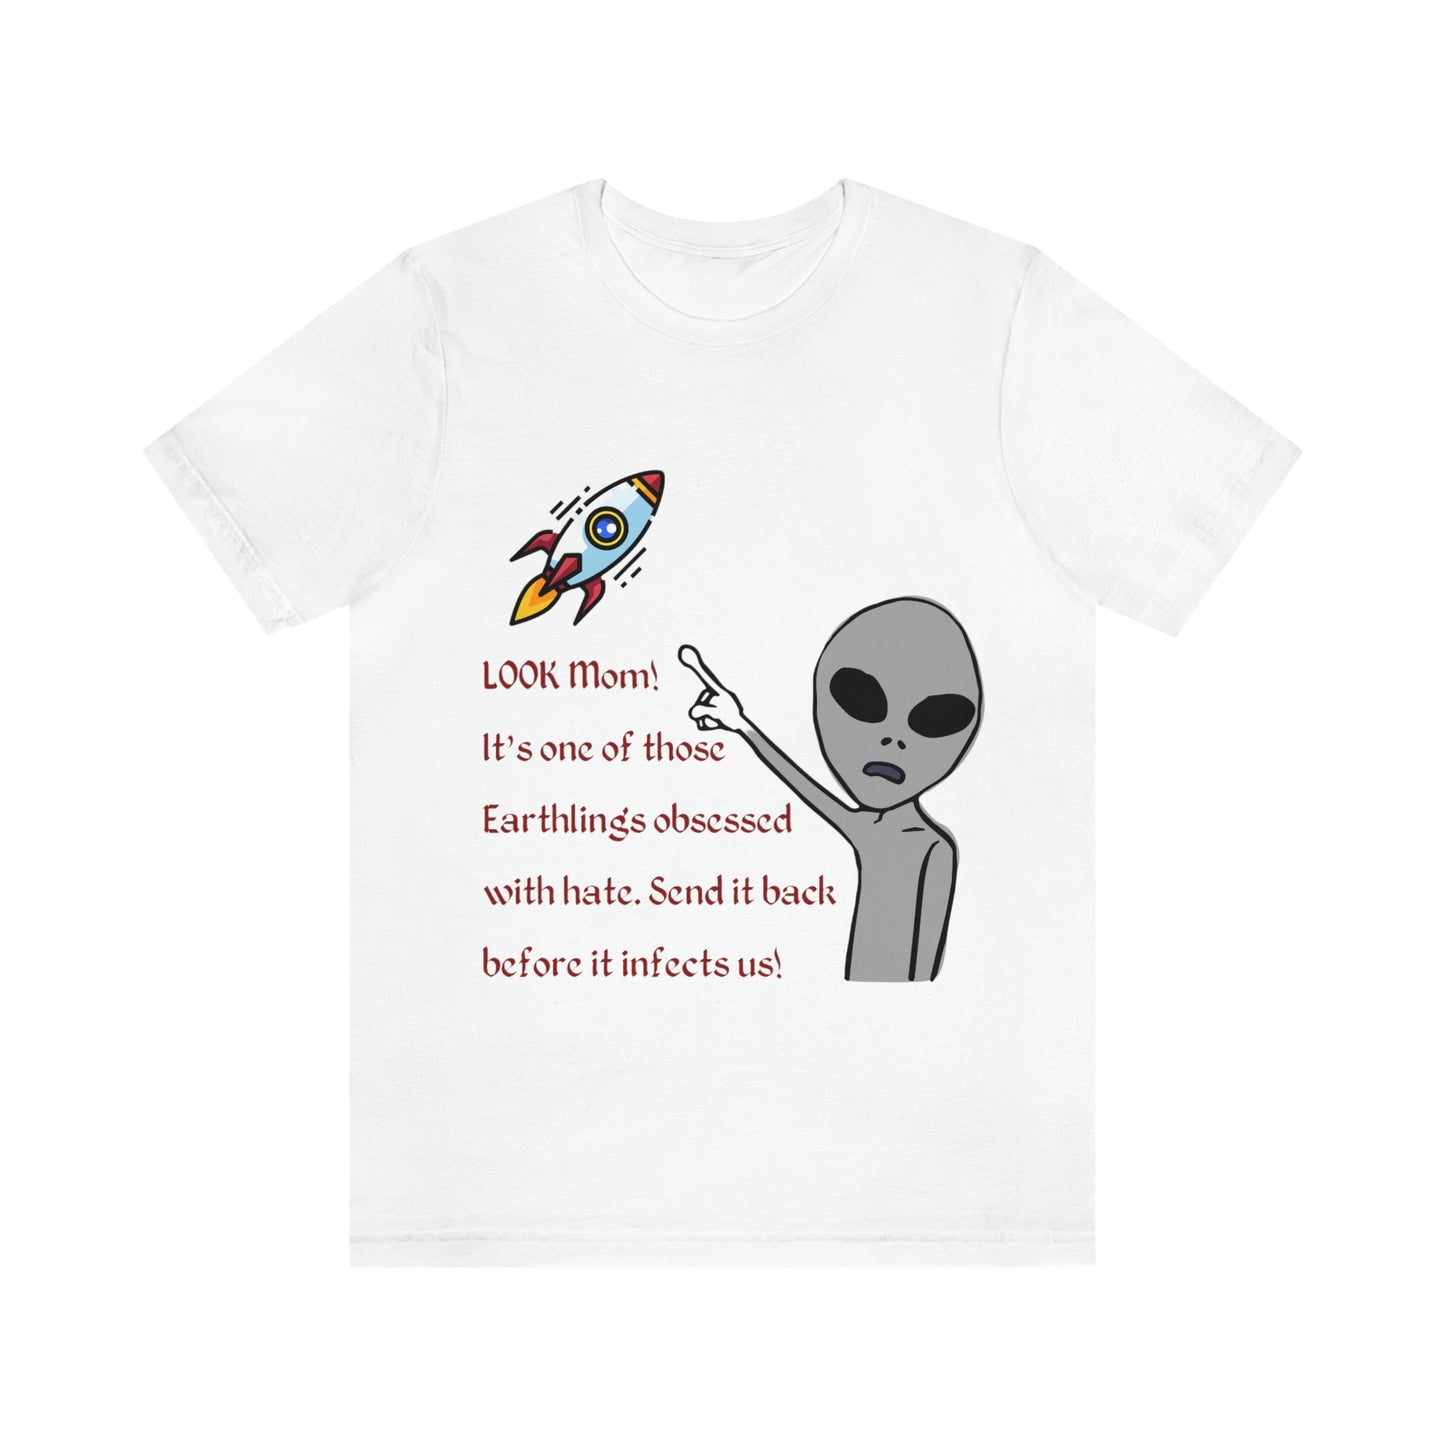 ‘LOOK Mom! It’s one of those Earthlings obsessed with hate. Send it back before it infects us!’ Unisex Jersey Short Sleeve Tee